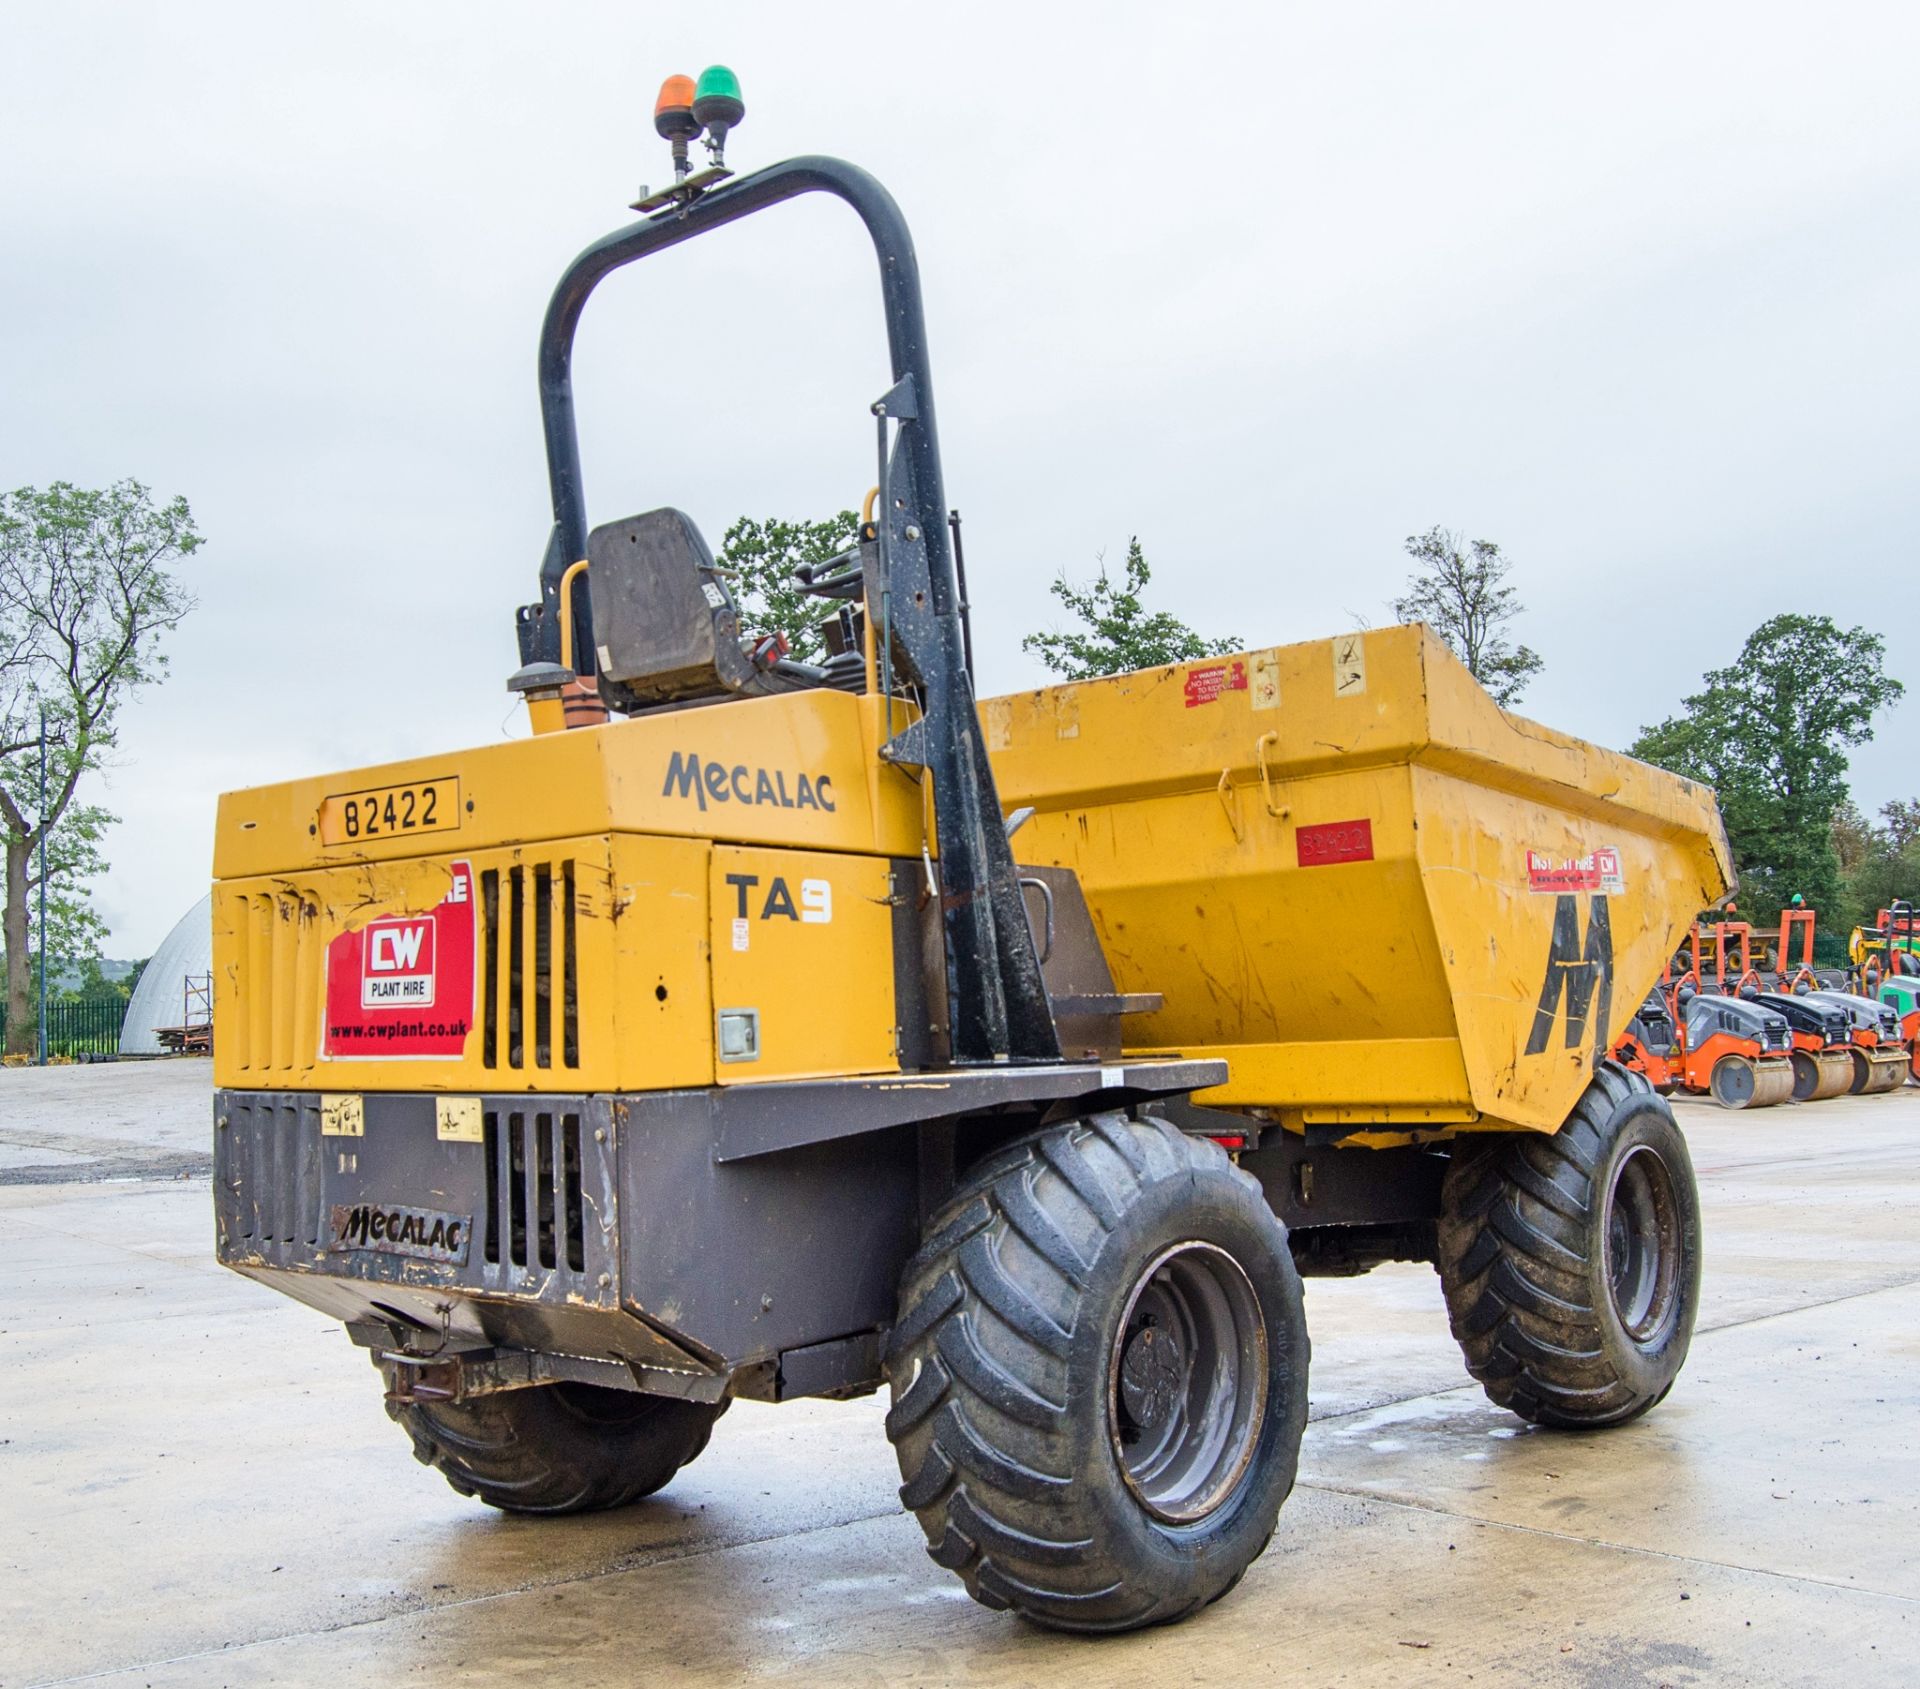 Mecalac TA9 9 tonne straight skip dumper Year: 2018 S/N: EJ2PS4319 Recorded Hours: 2157 82422 - Image 3 of 22